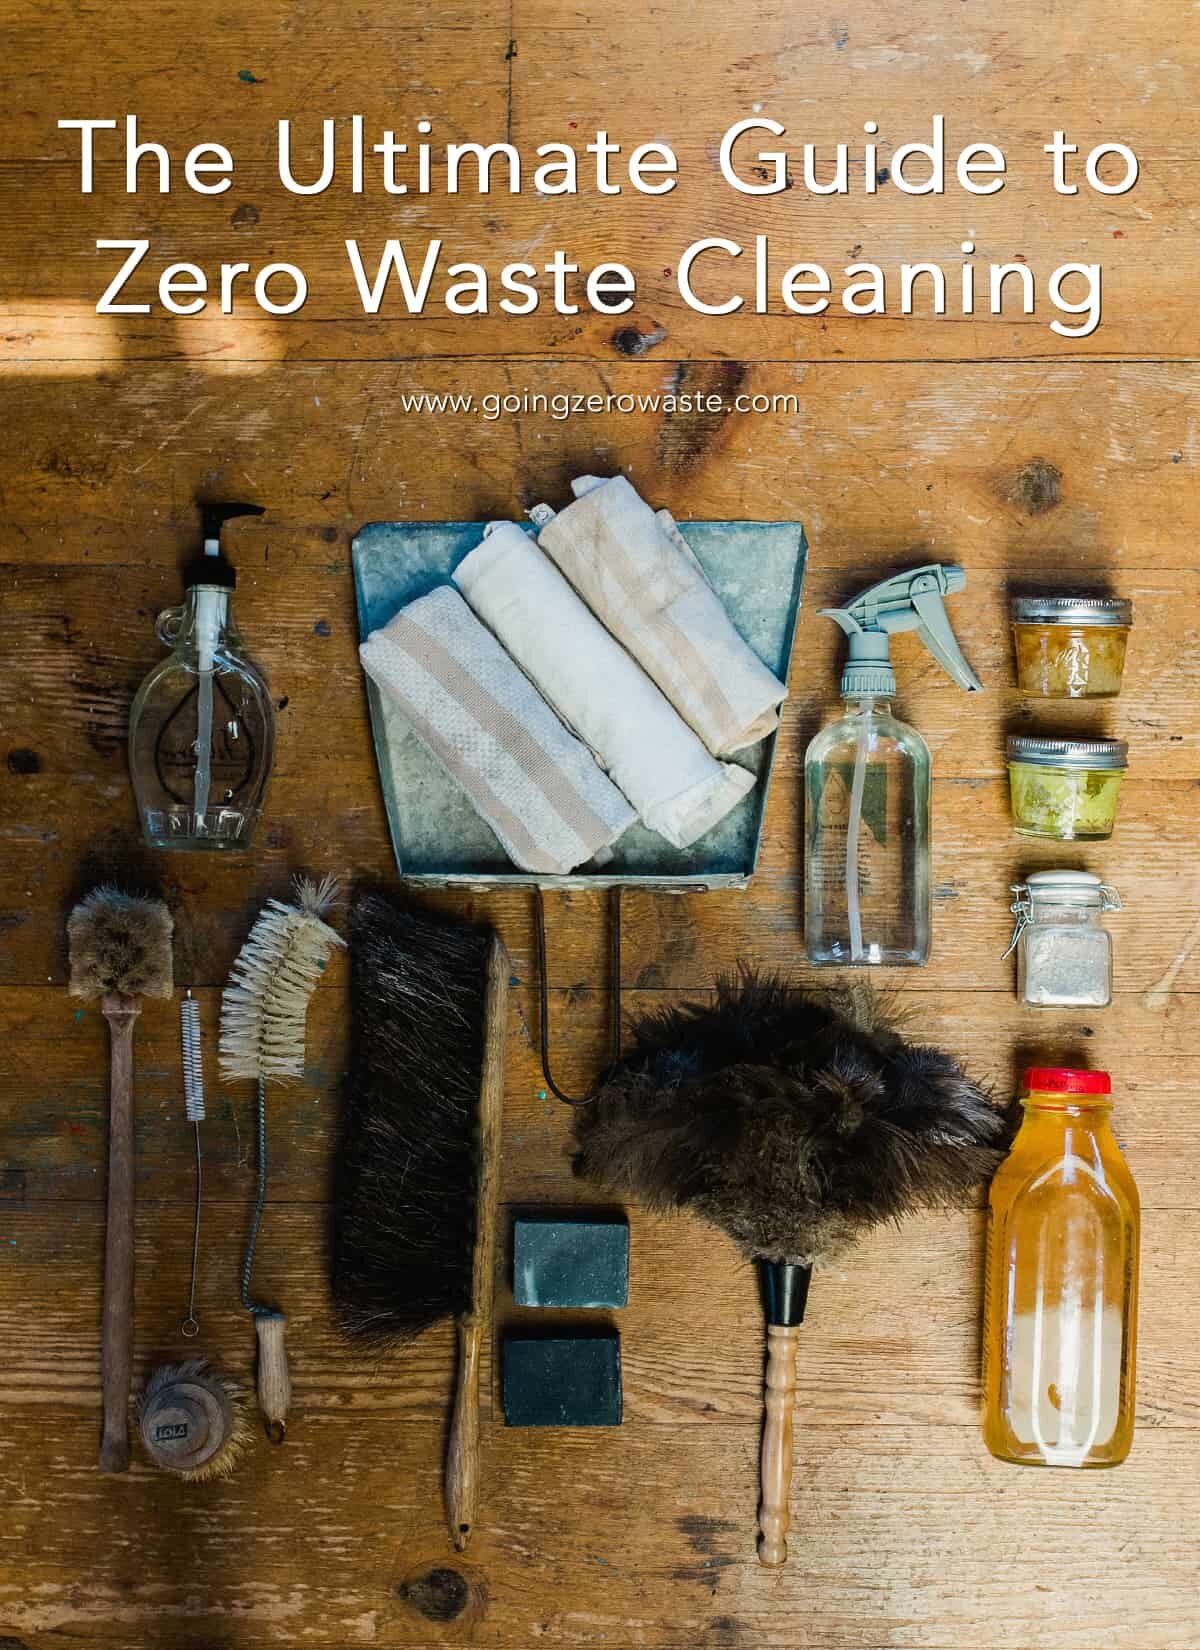 Day 7: Zero Waste Cleaning